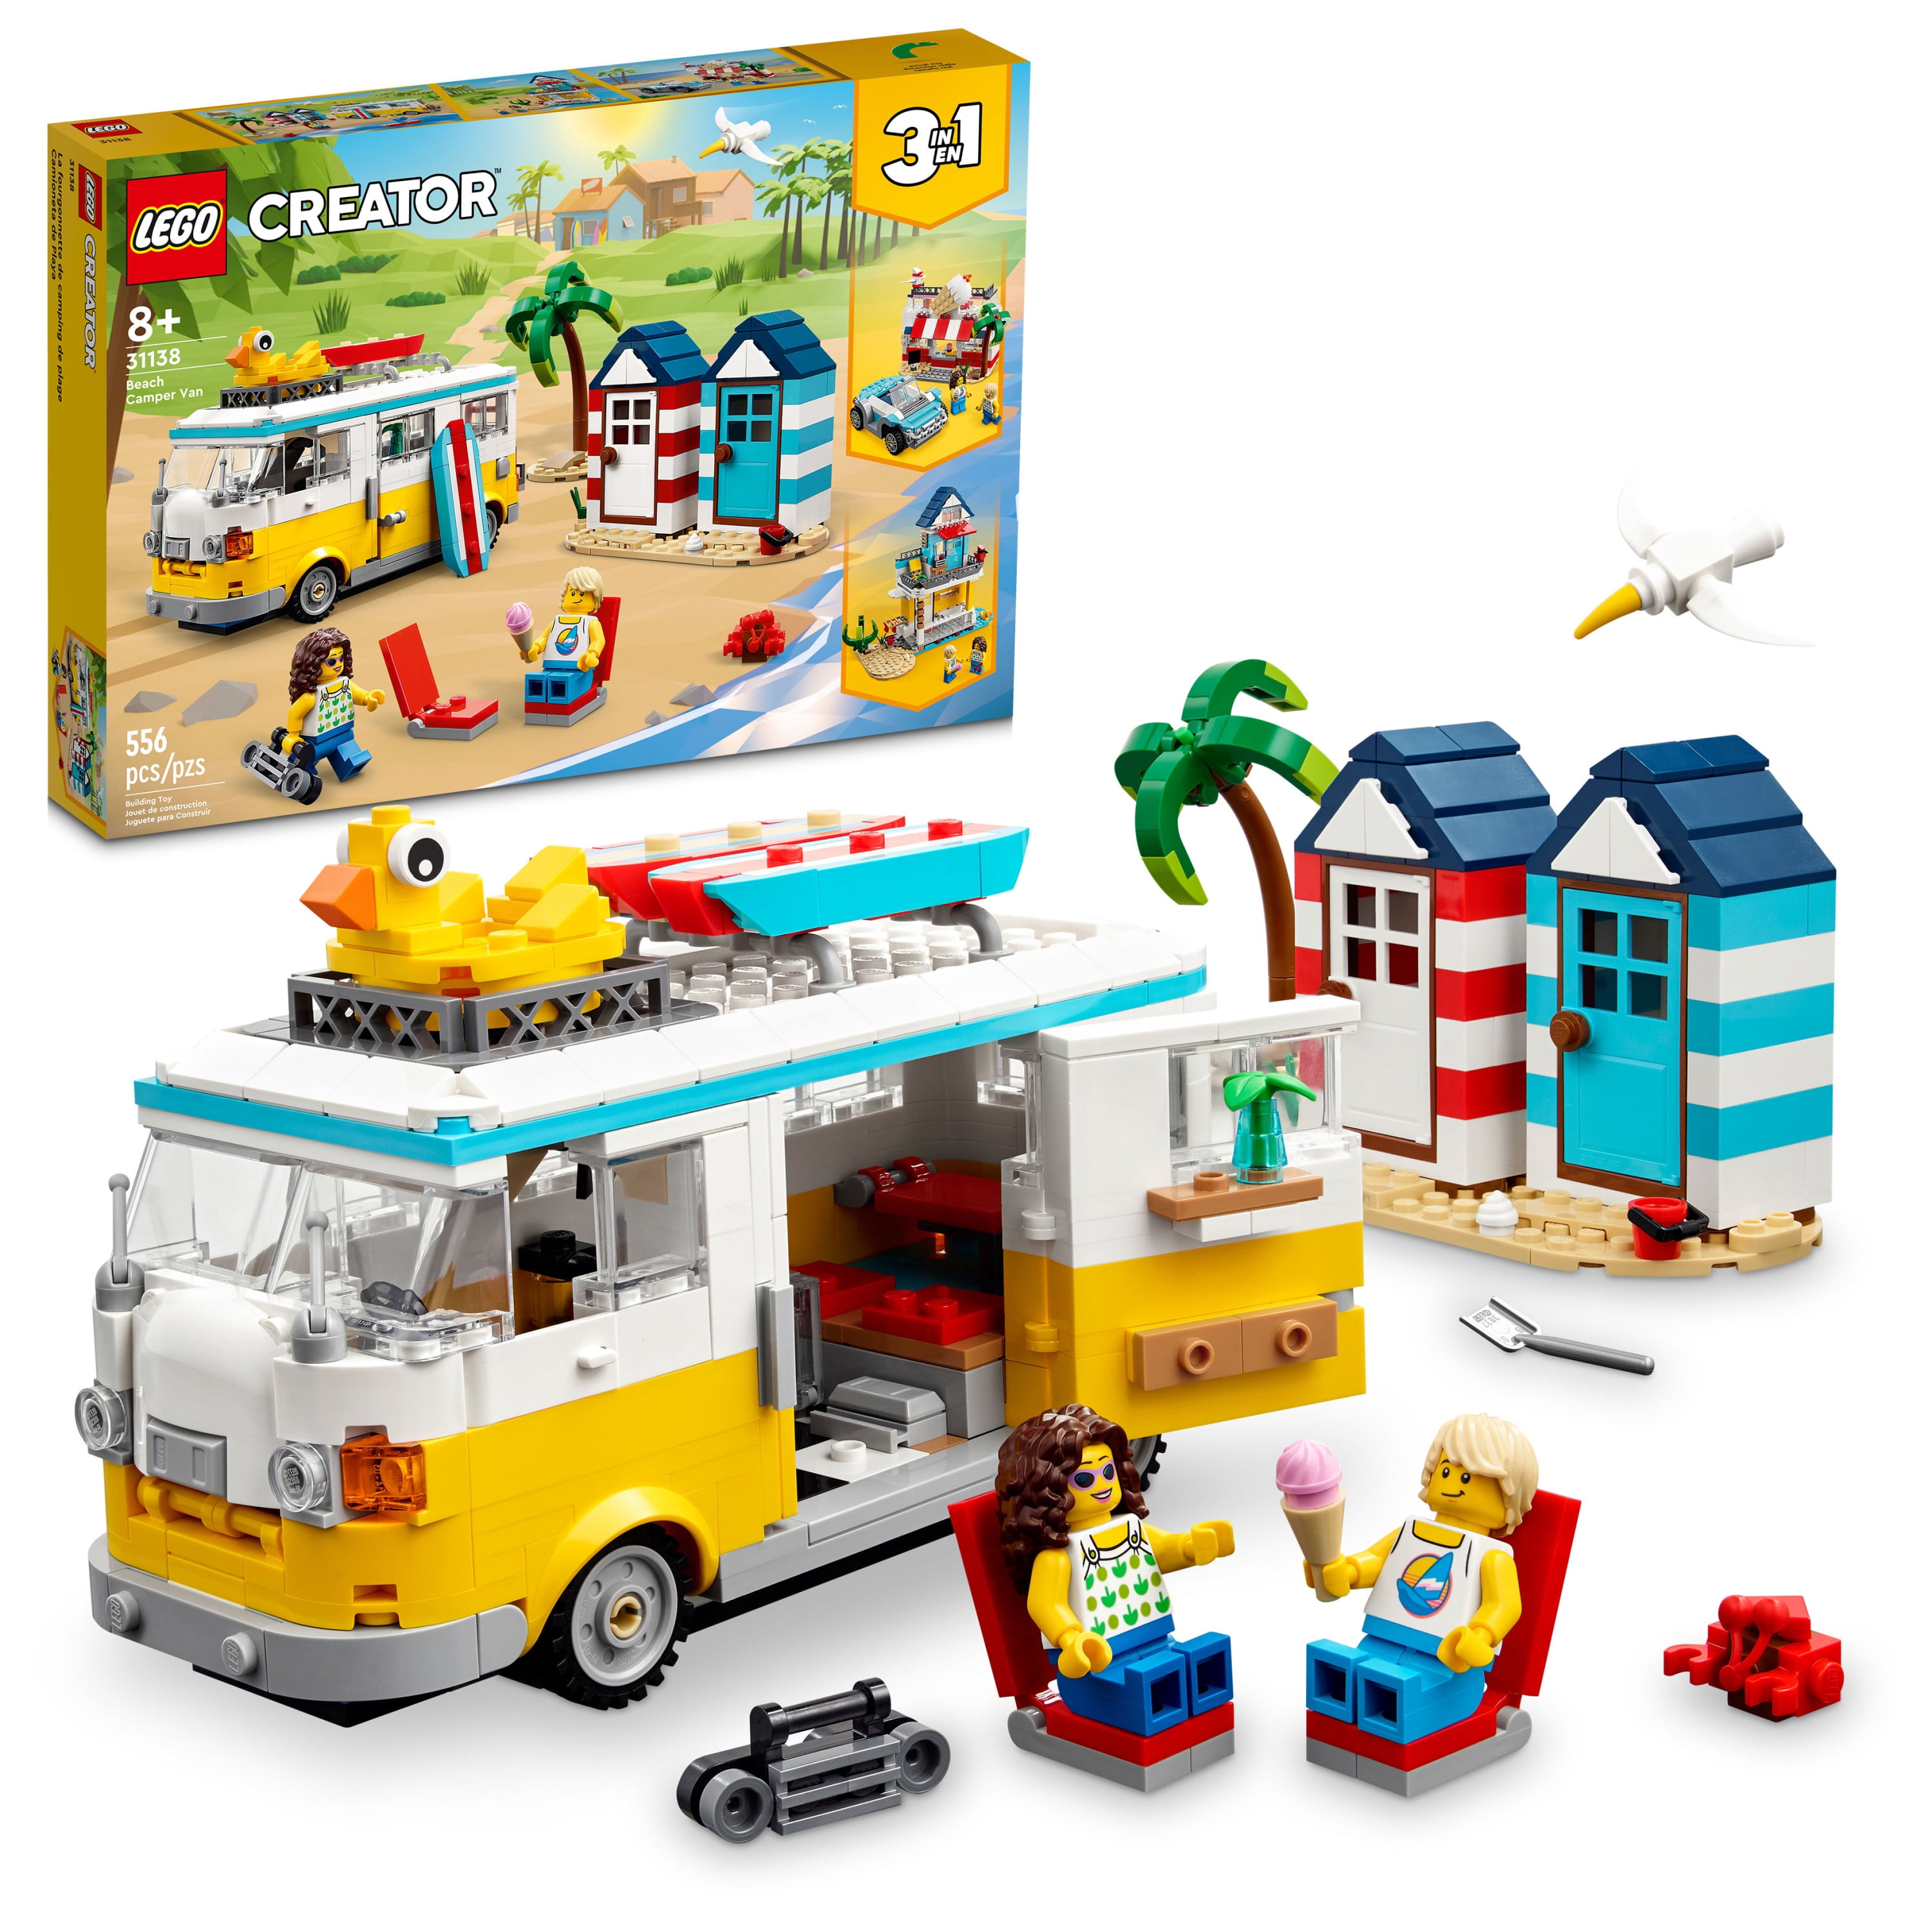 LEGO Creator 3 in 1 Beach Camper Van Building Kit, Transforms from a  Campervan to Ice Cream Shop to Beach House, Great Gift for Surfer Boys and  Girls, Pretend Play Beach Life